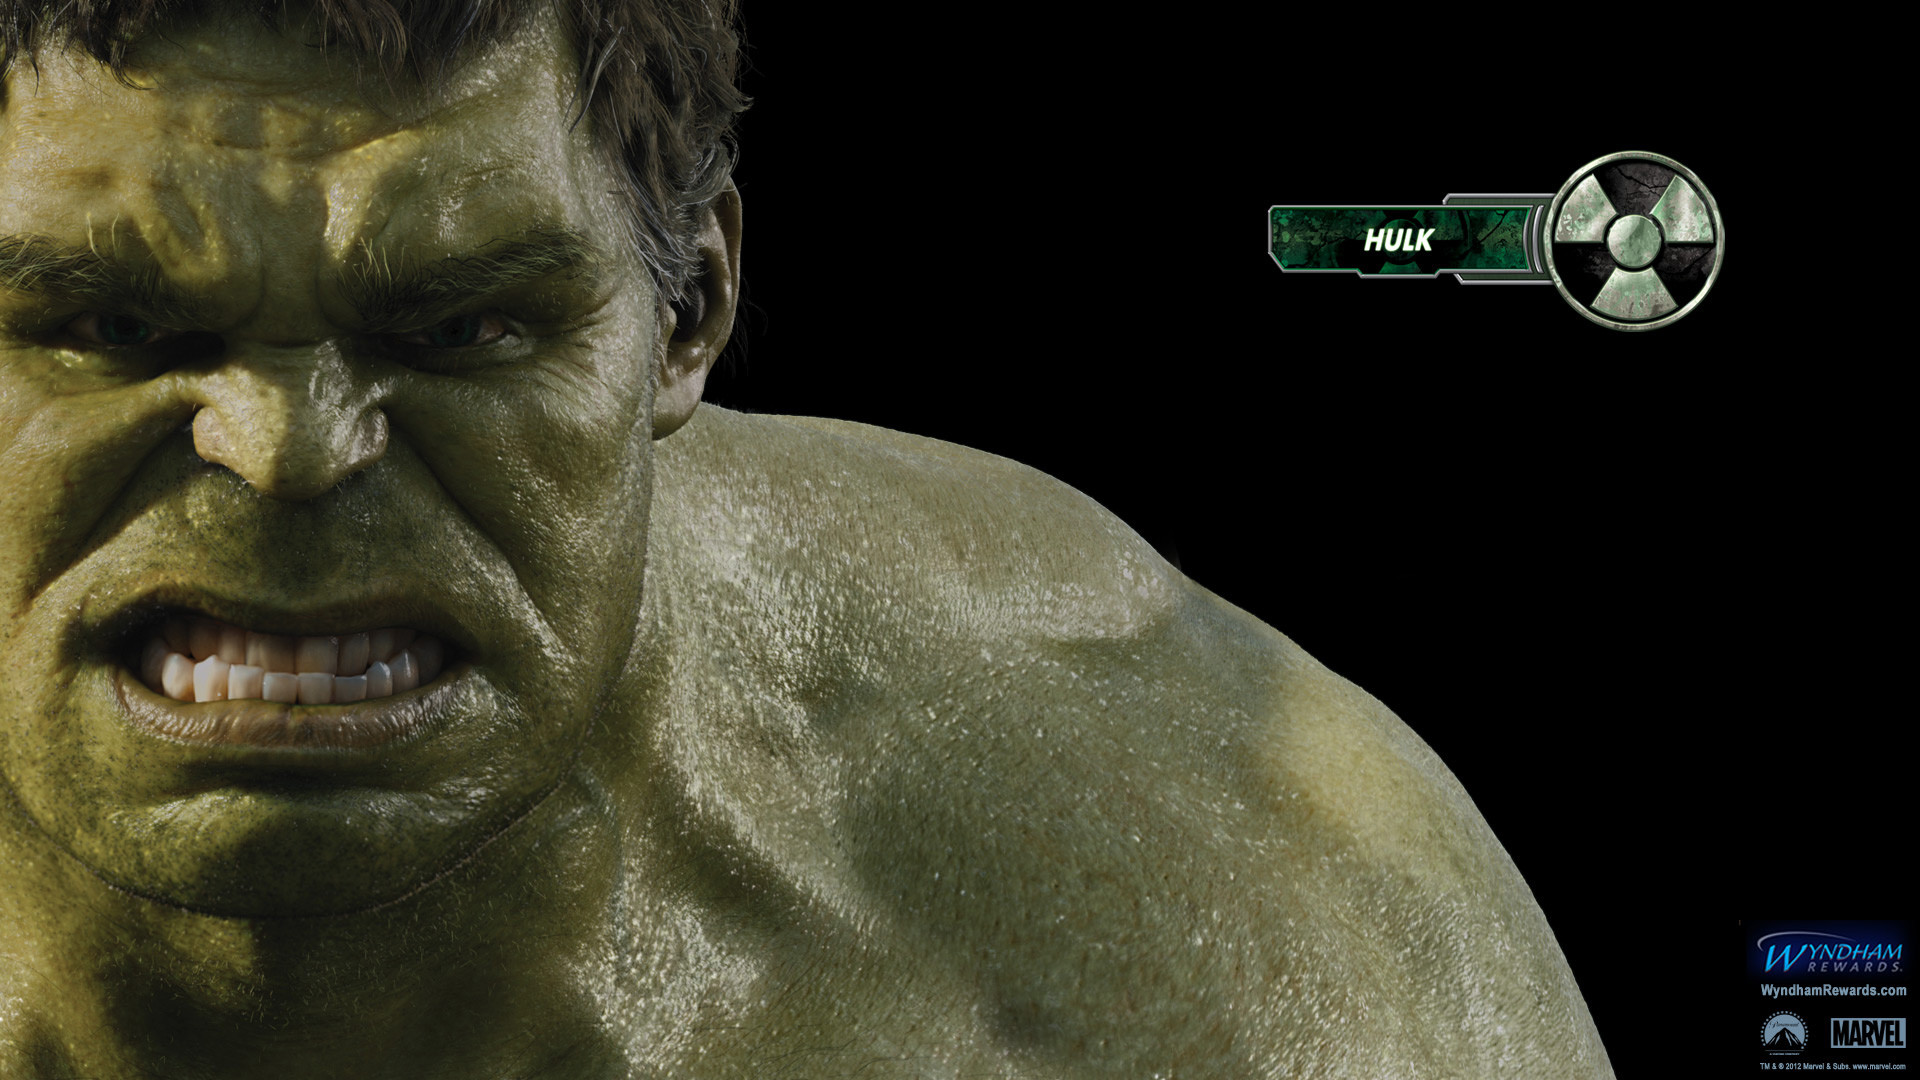 1920x1080 Incredible Hulk Avengers Wallpaper Images amp Pictures Becuo 